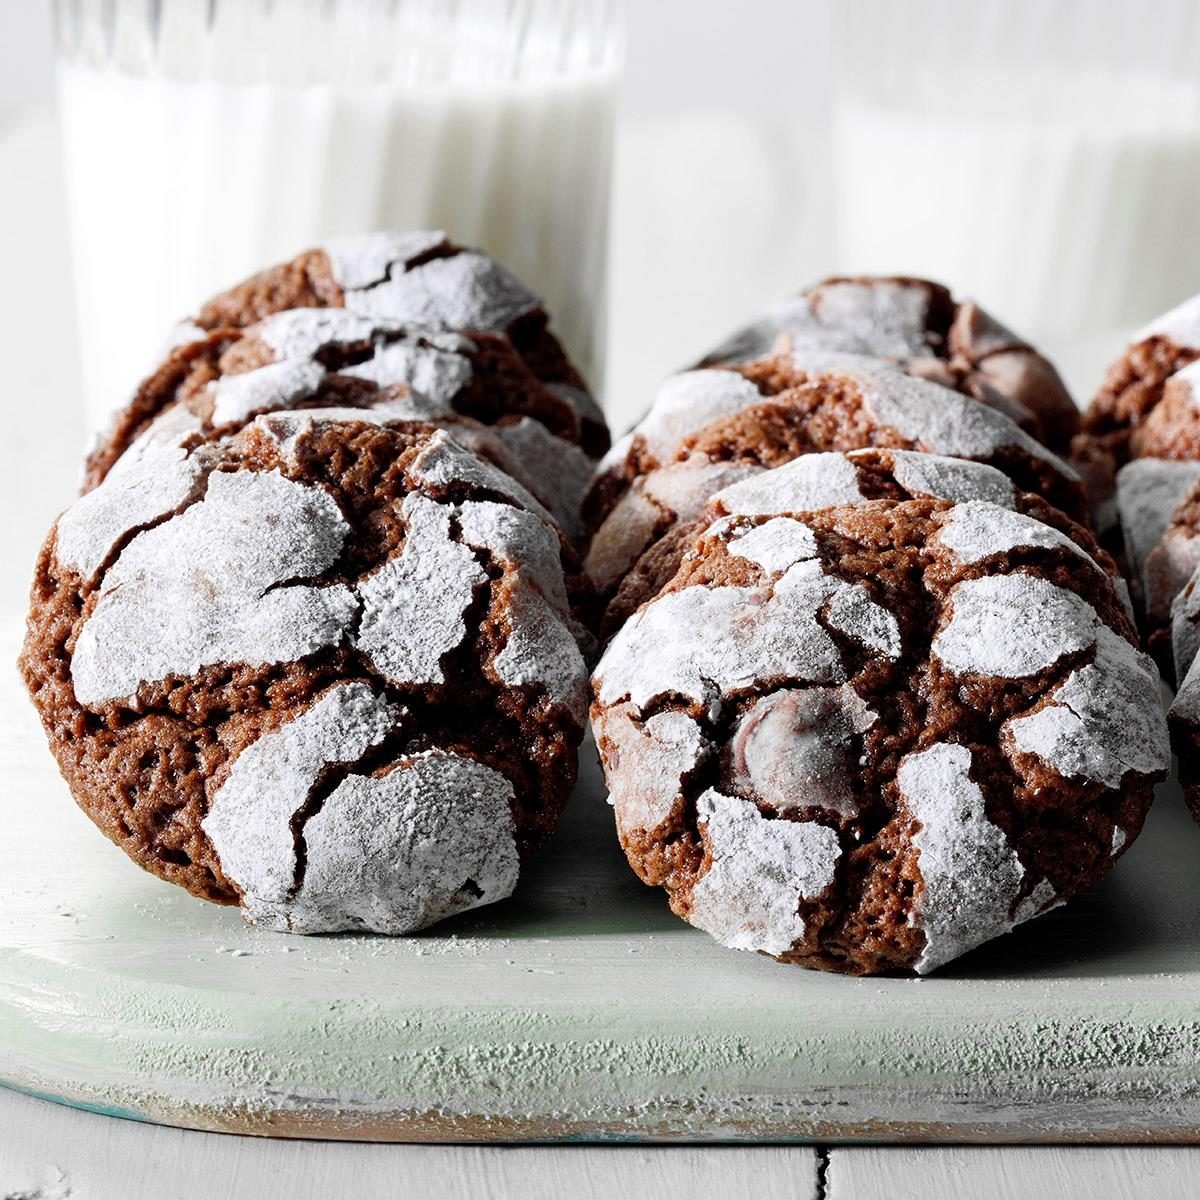 https://www.tasteofhome.com/wp-content/uploads/2018/01/Chocolate-Crinkle-Cookies_EXPS_HCBZ22_16297_P2_MD_05_24_6b.jpg